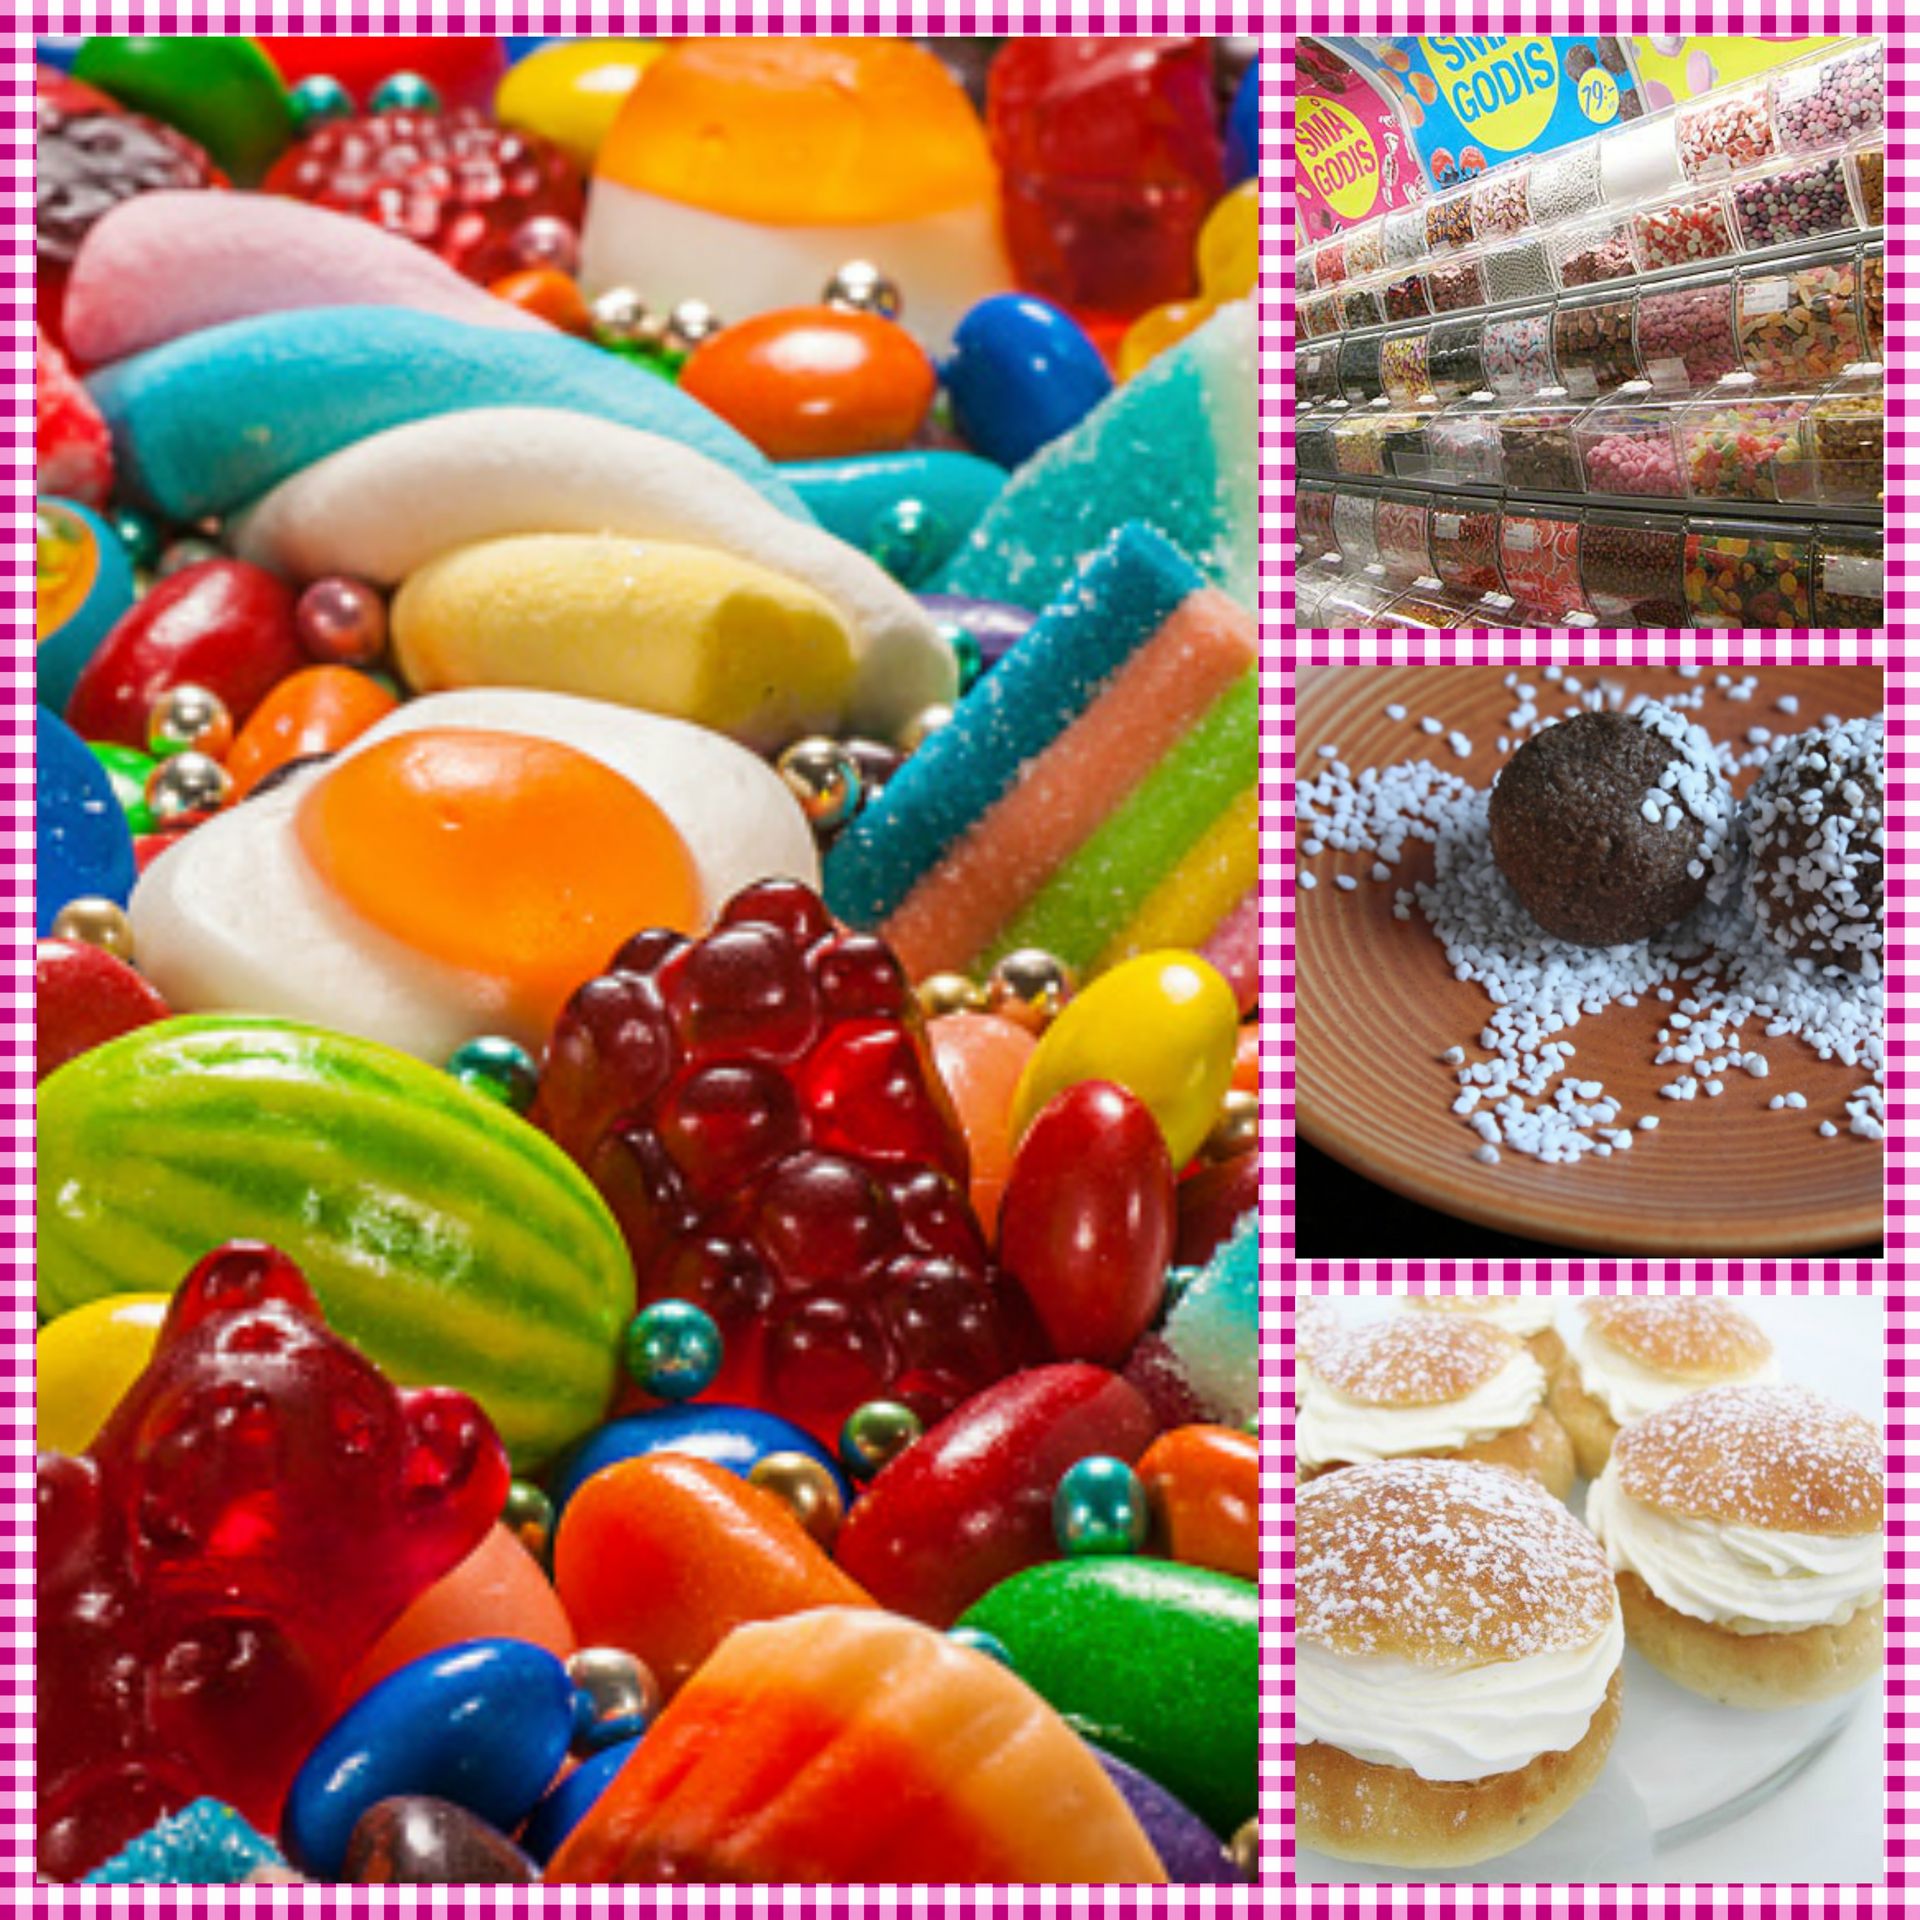 Swedish Candy stores and desserts